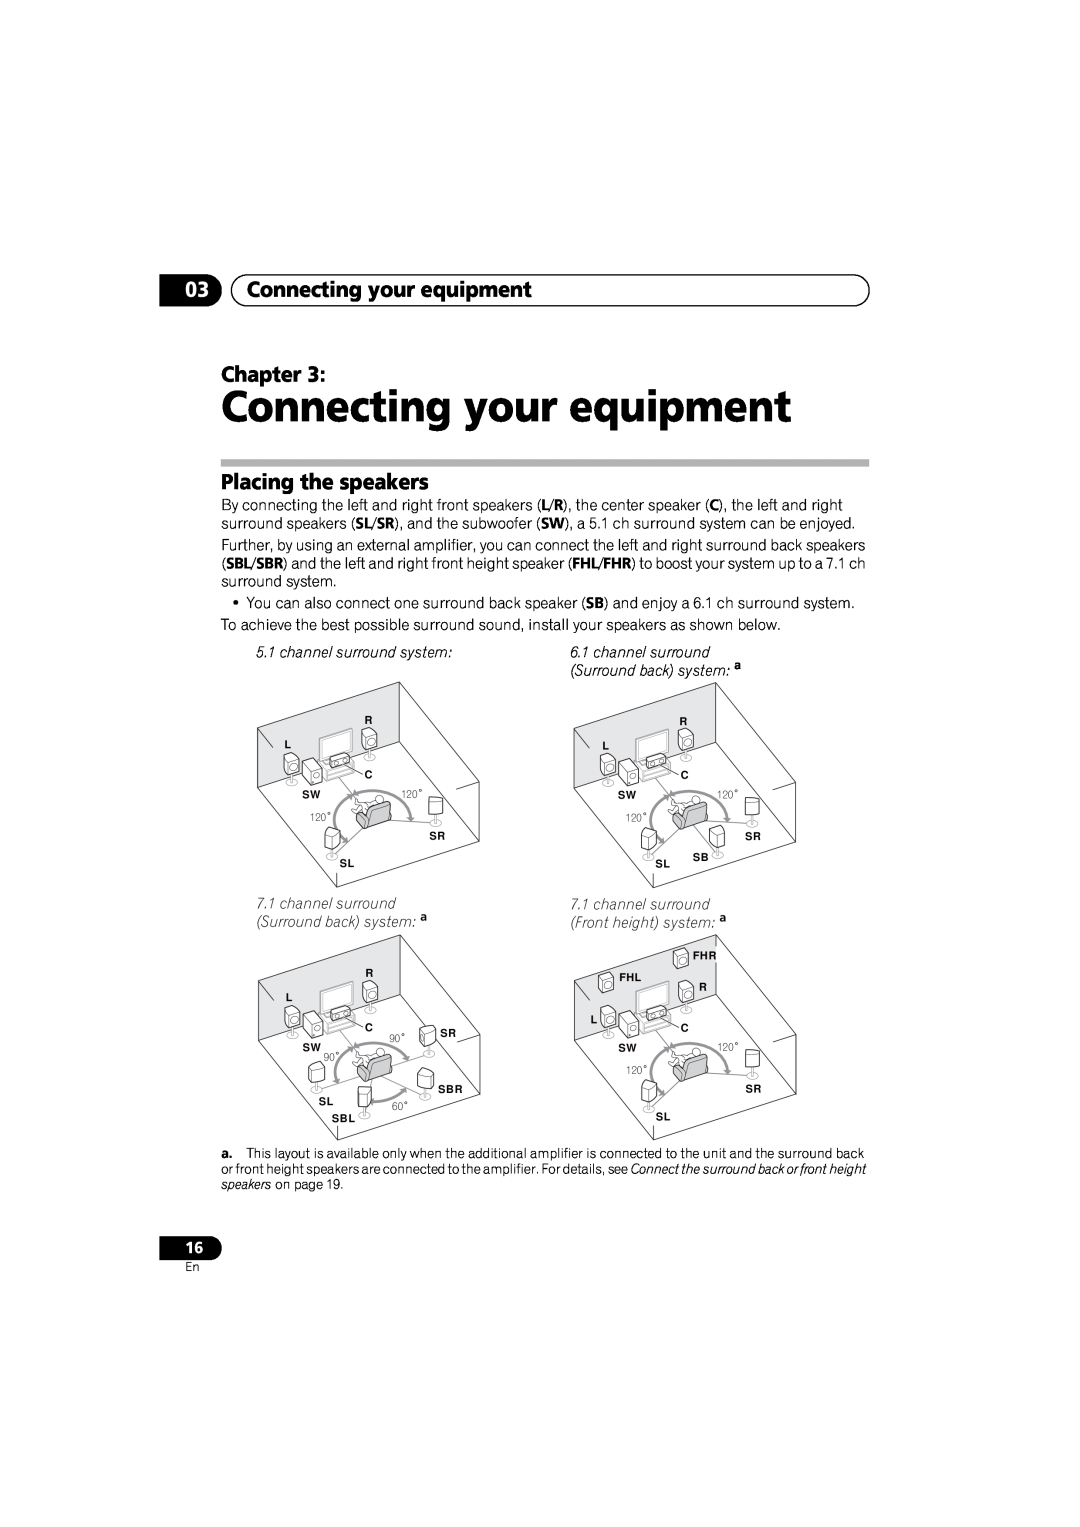 Pioneer VSX-520 03Connecting your equipment Chapter, Placing the speakers, channel surround, Surround back system: a 